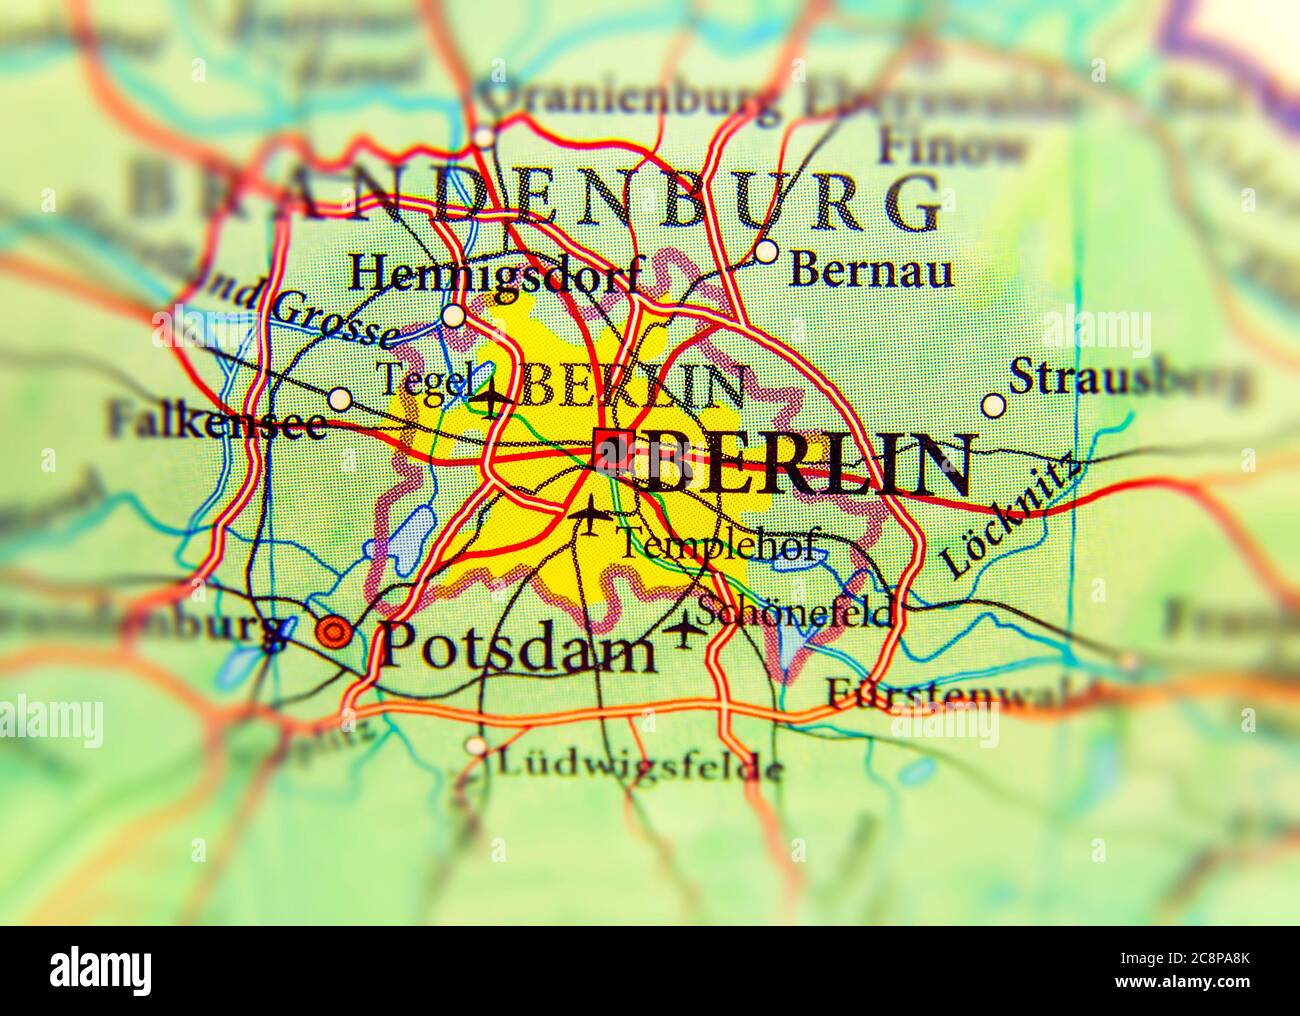 Geographic Map Of European Country Germany With Berlin City 2C8PA8K 